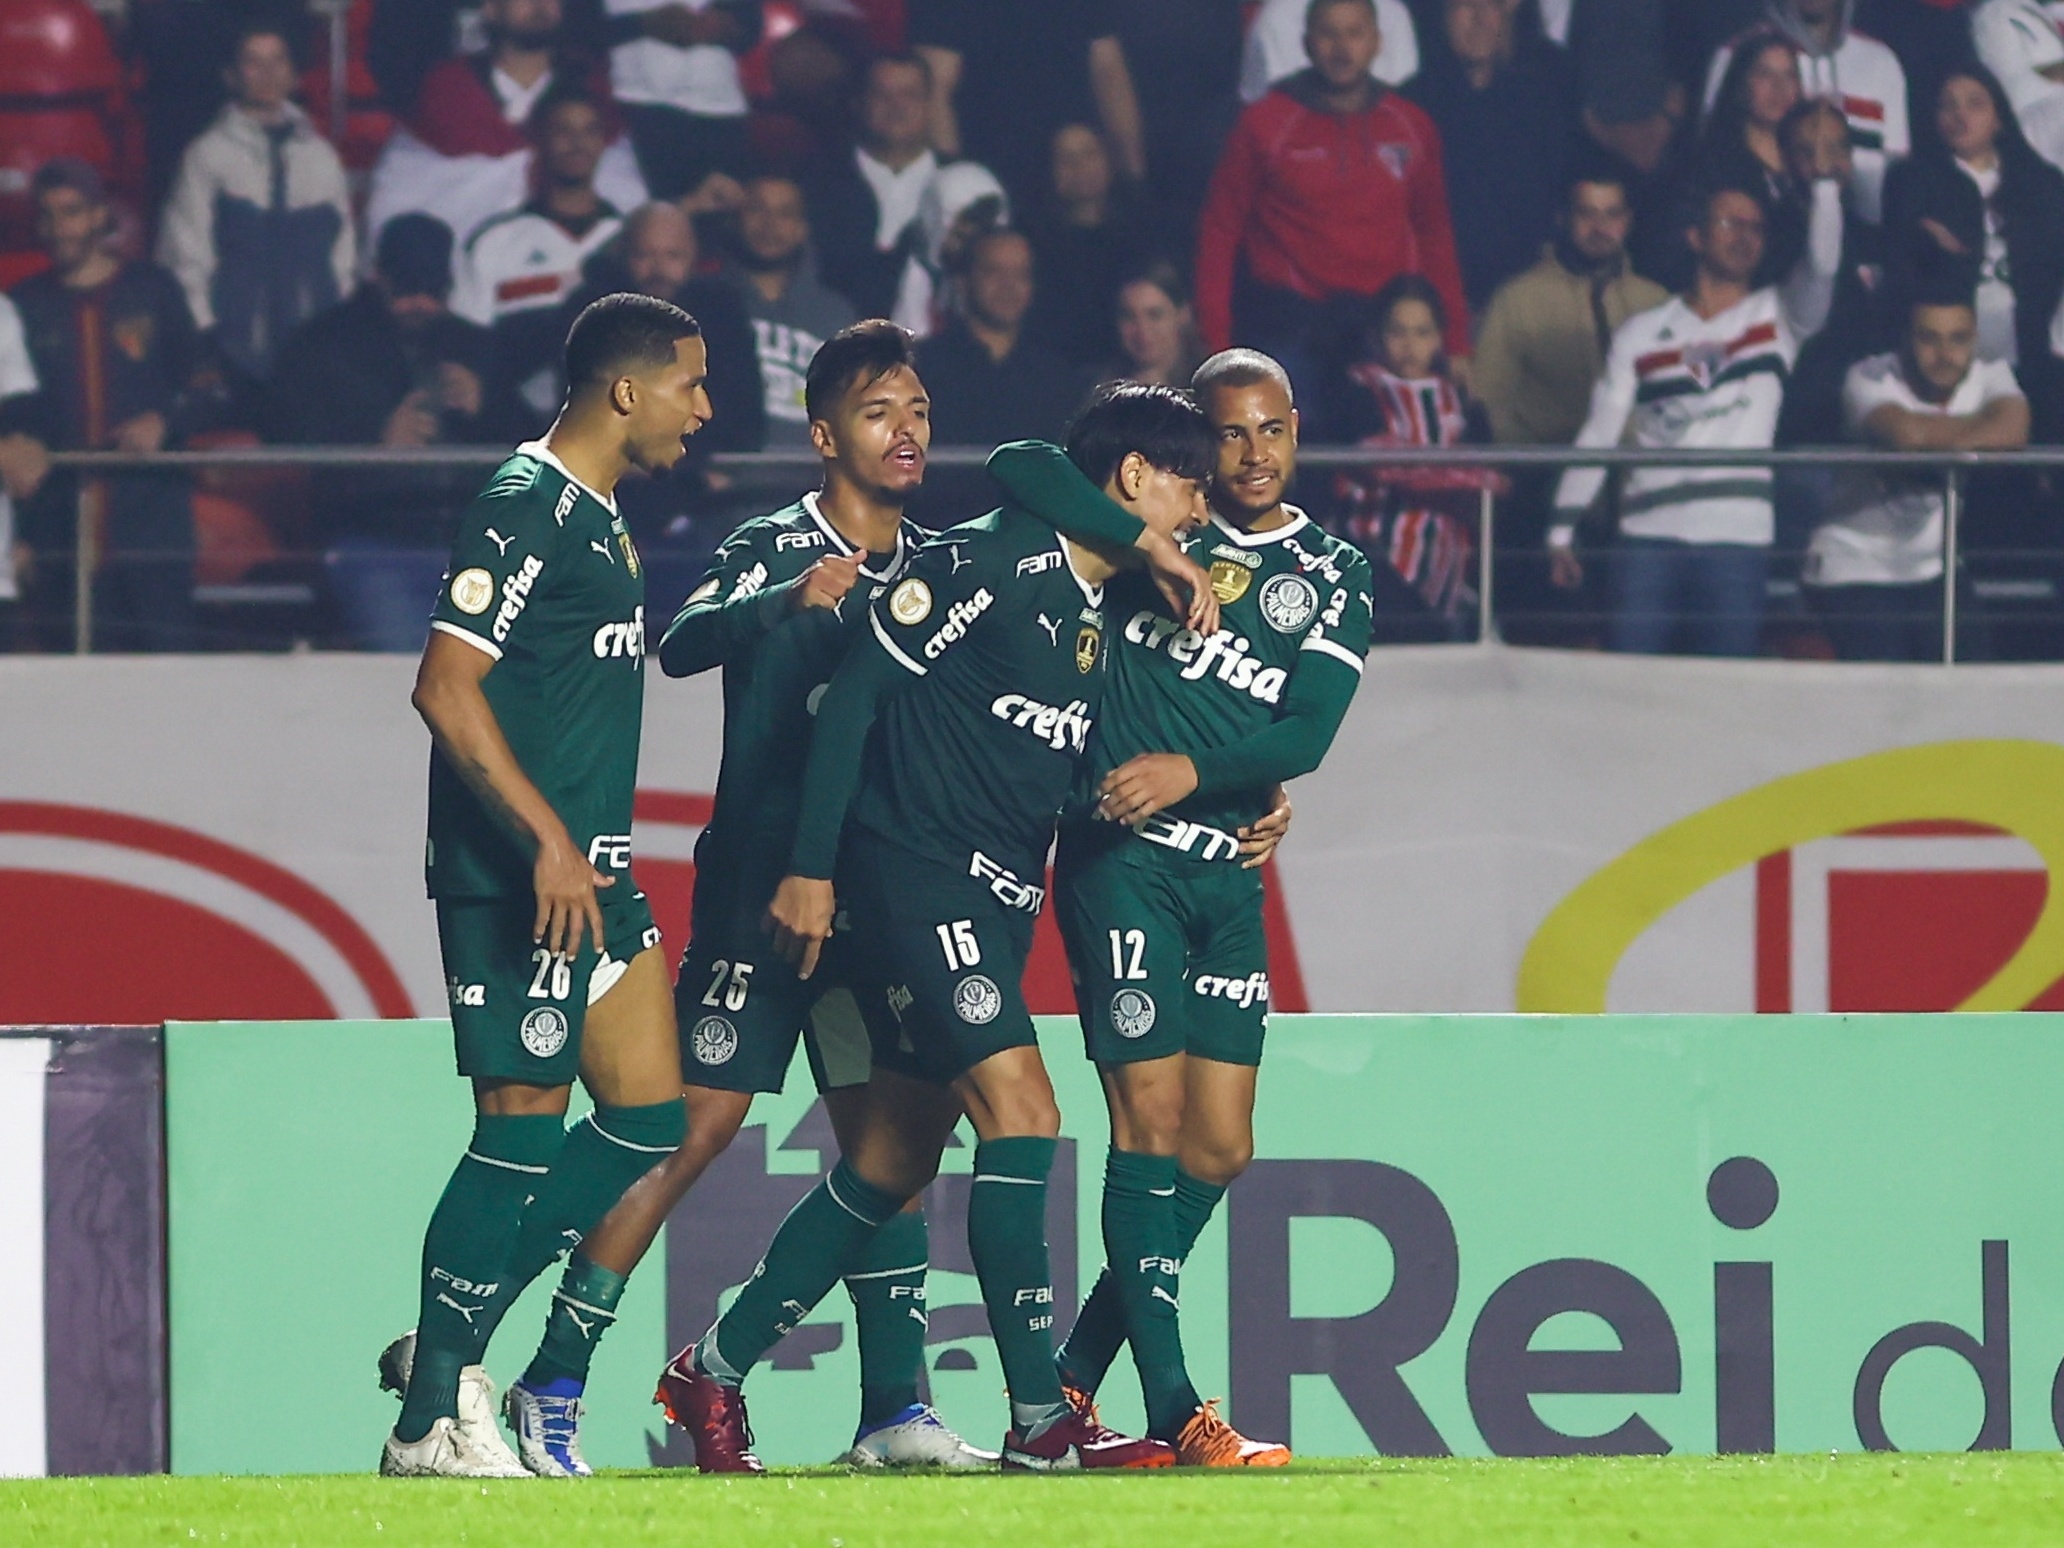 SP - Sao Paulo - 03/30/2022 - PAULISTA 2022, SAO PAULO X PALMEIRAS - Sao  Paulo player Calleri celebrates his goal with players from his team during  a match against Palmeiras at